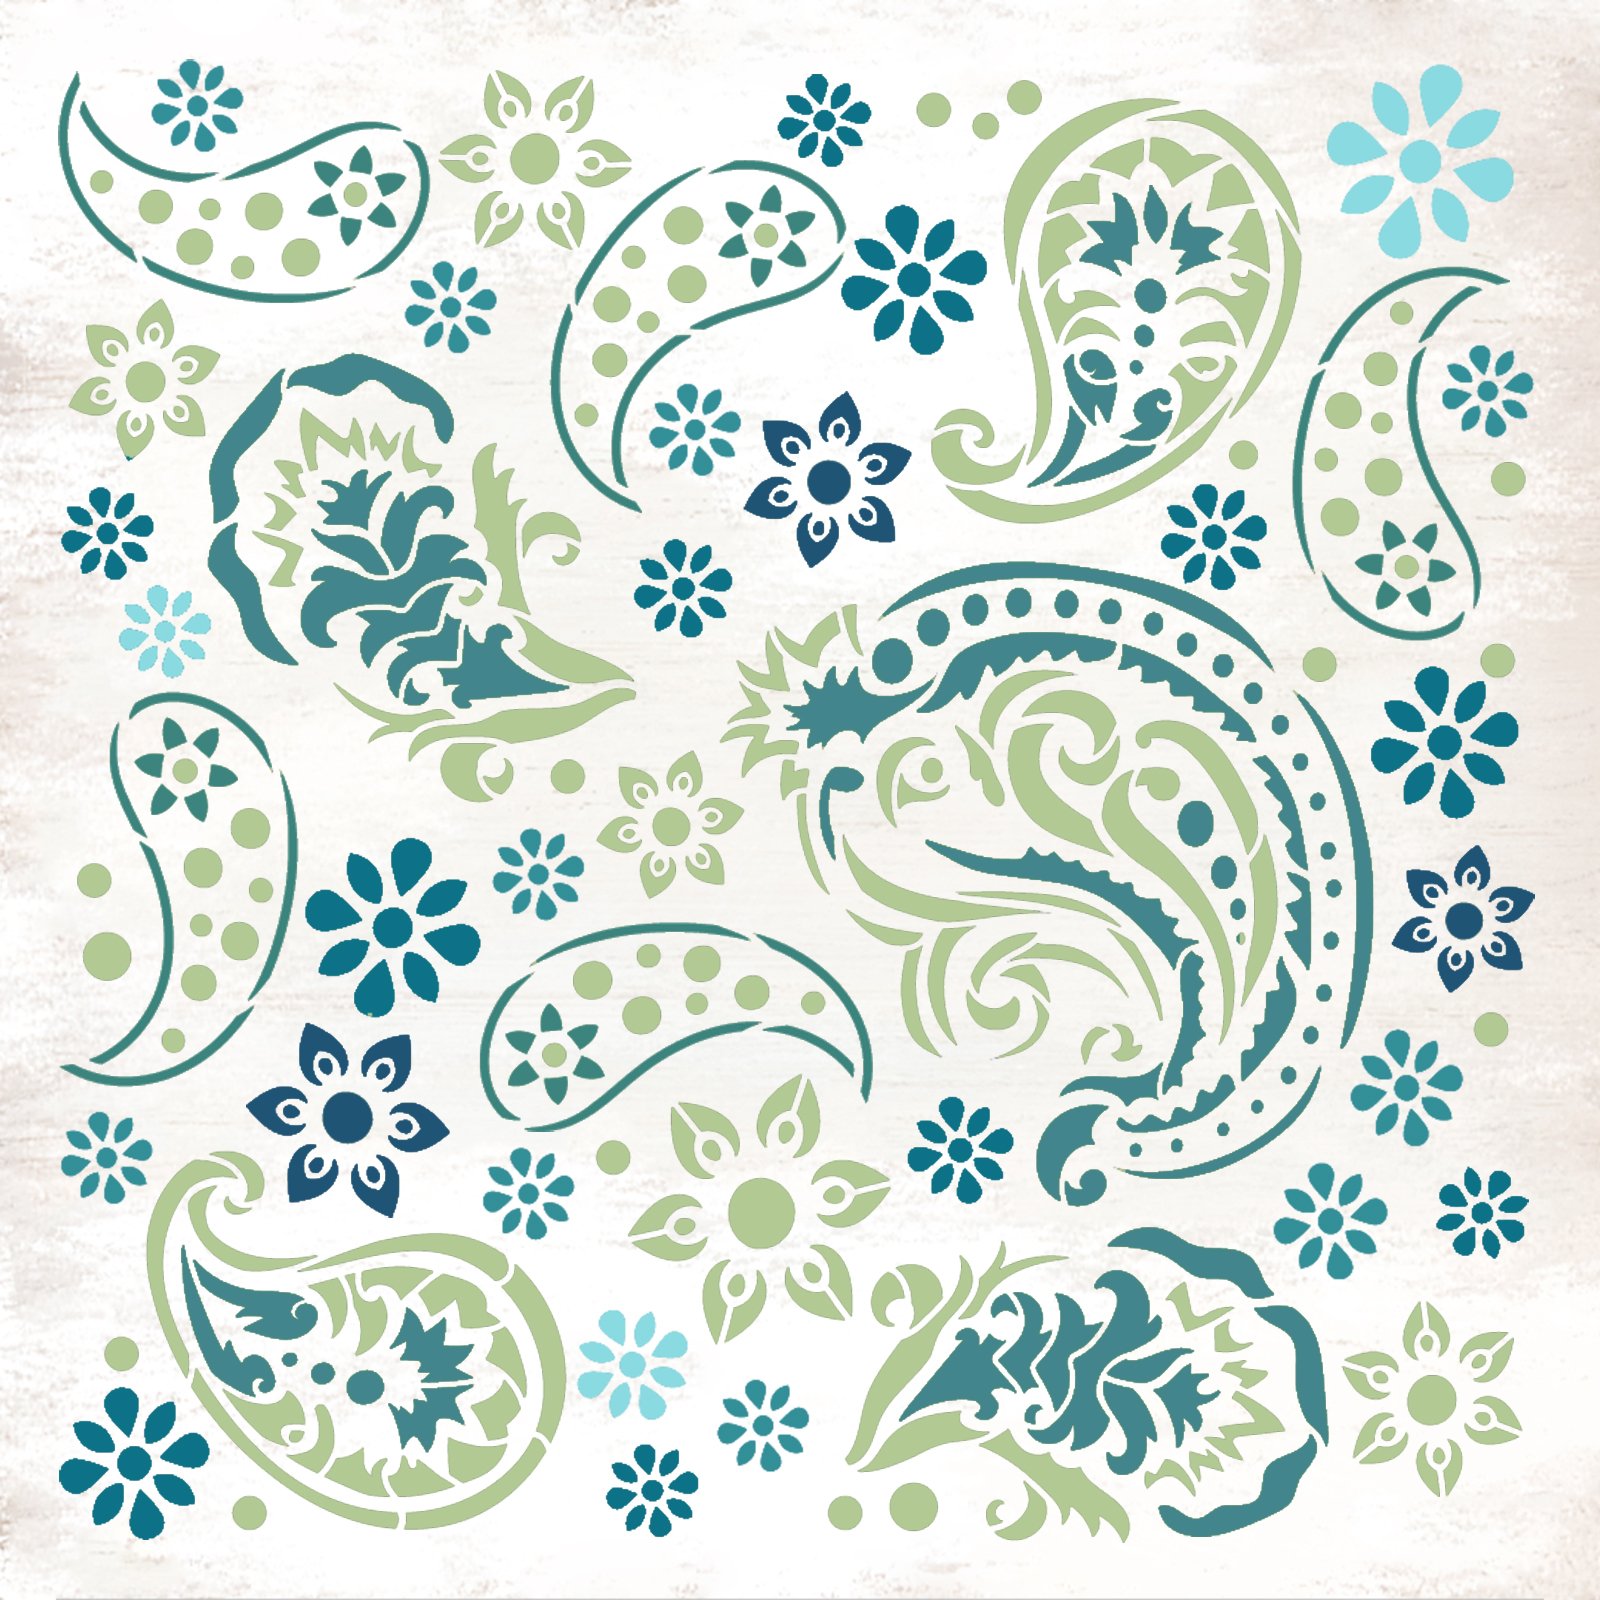  CrafTreat Paisley Stencils for Crafts Reusable